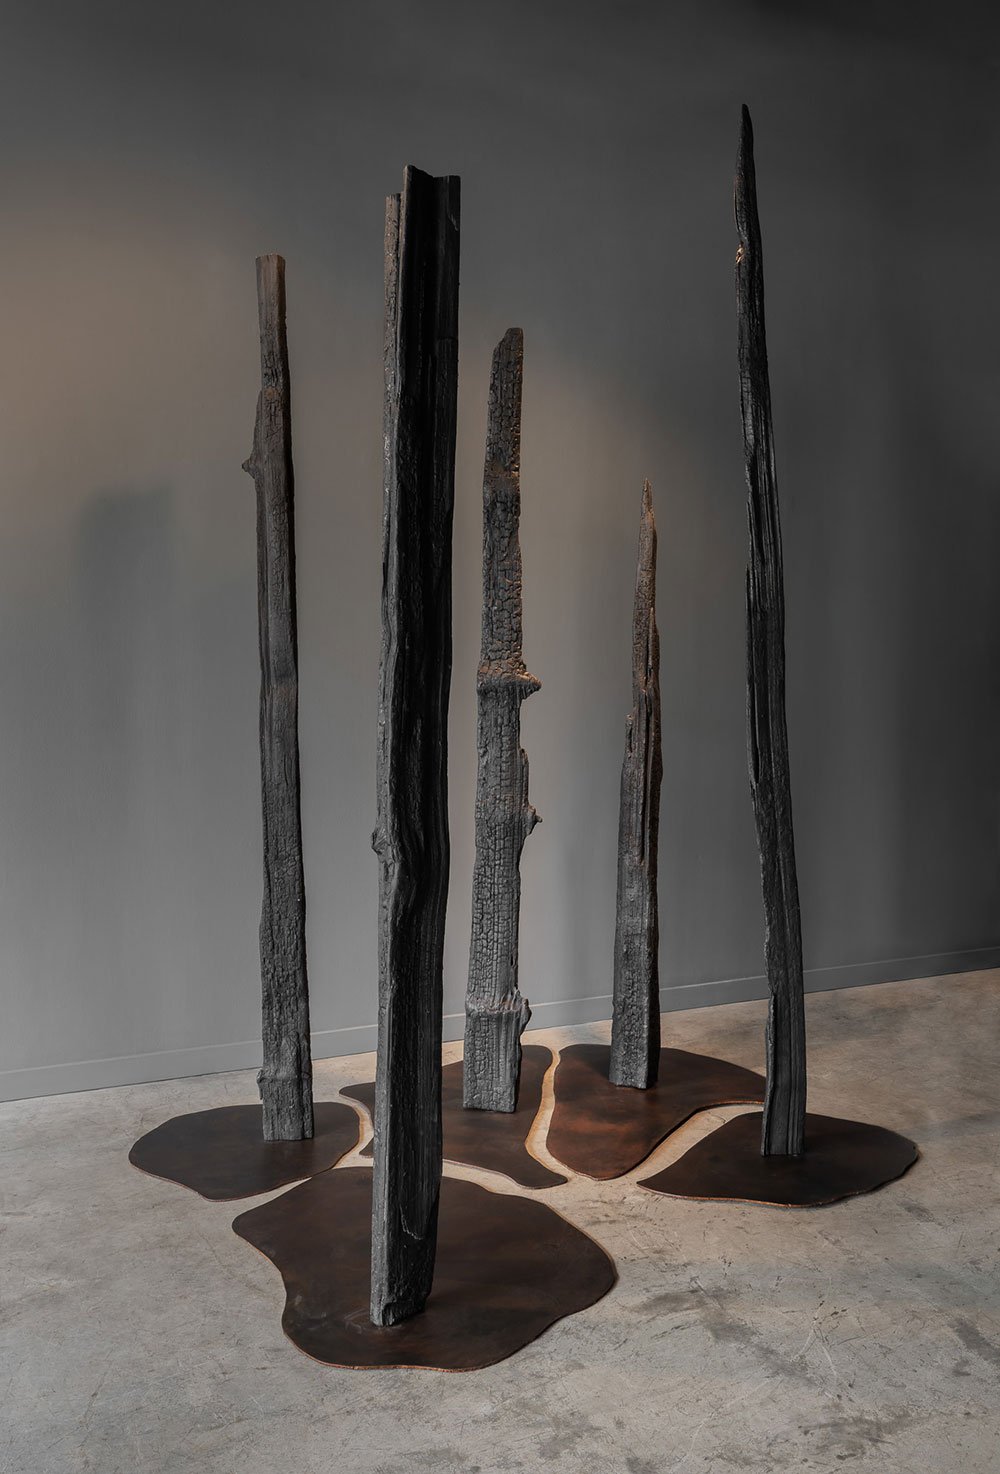 A collection of five grey and charcoal wood sculptures are clustered together on a grey concrete gallery floor. They stand vertically in sculpted dark pools against a grey wall.